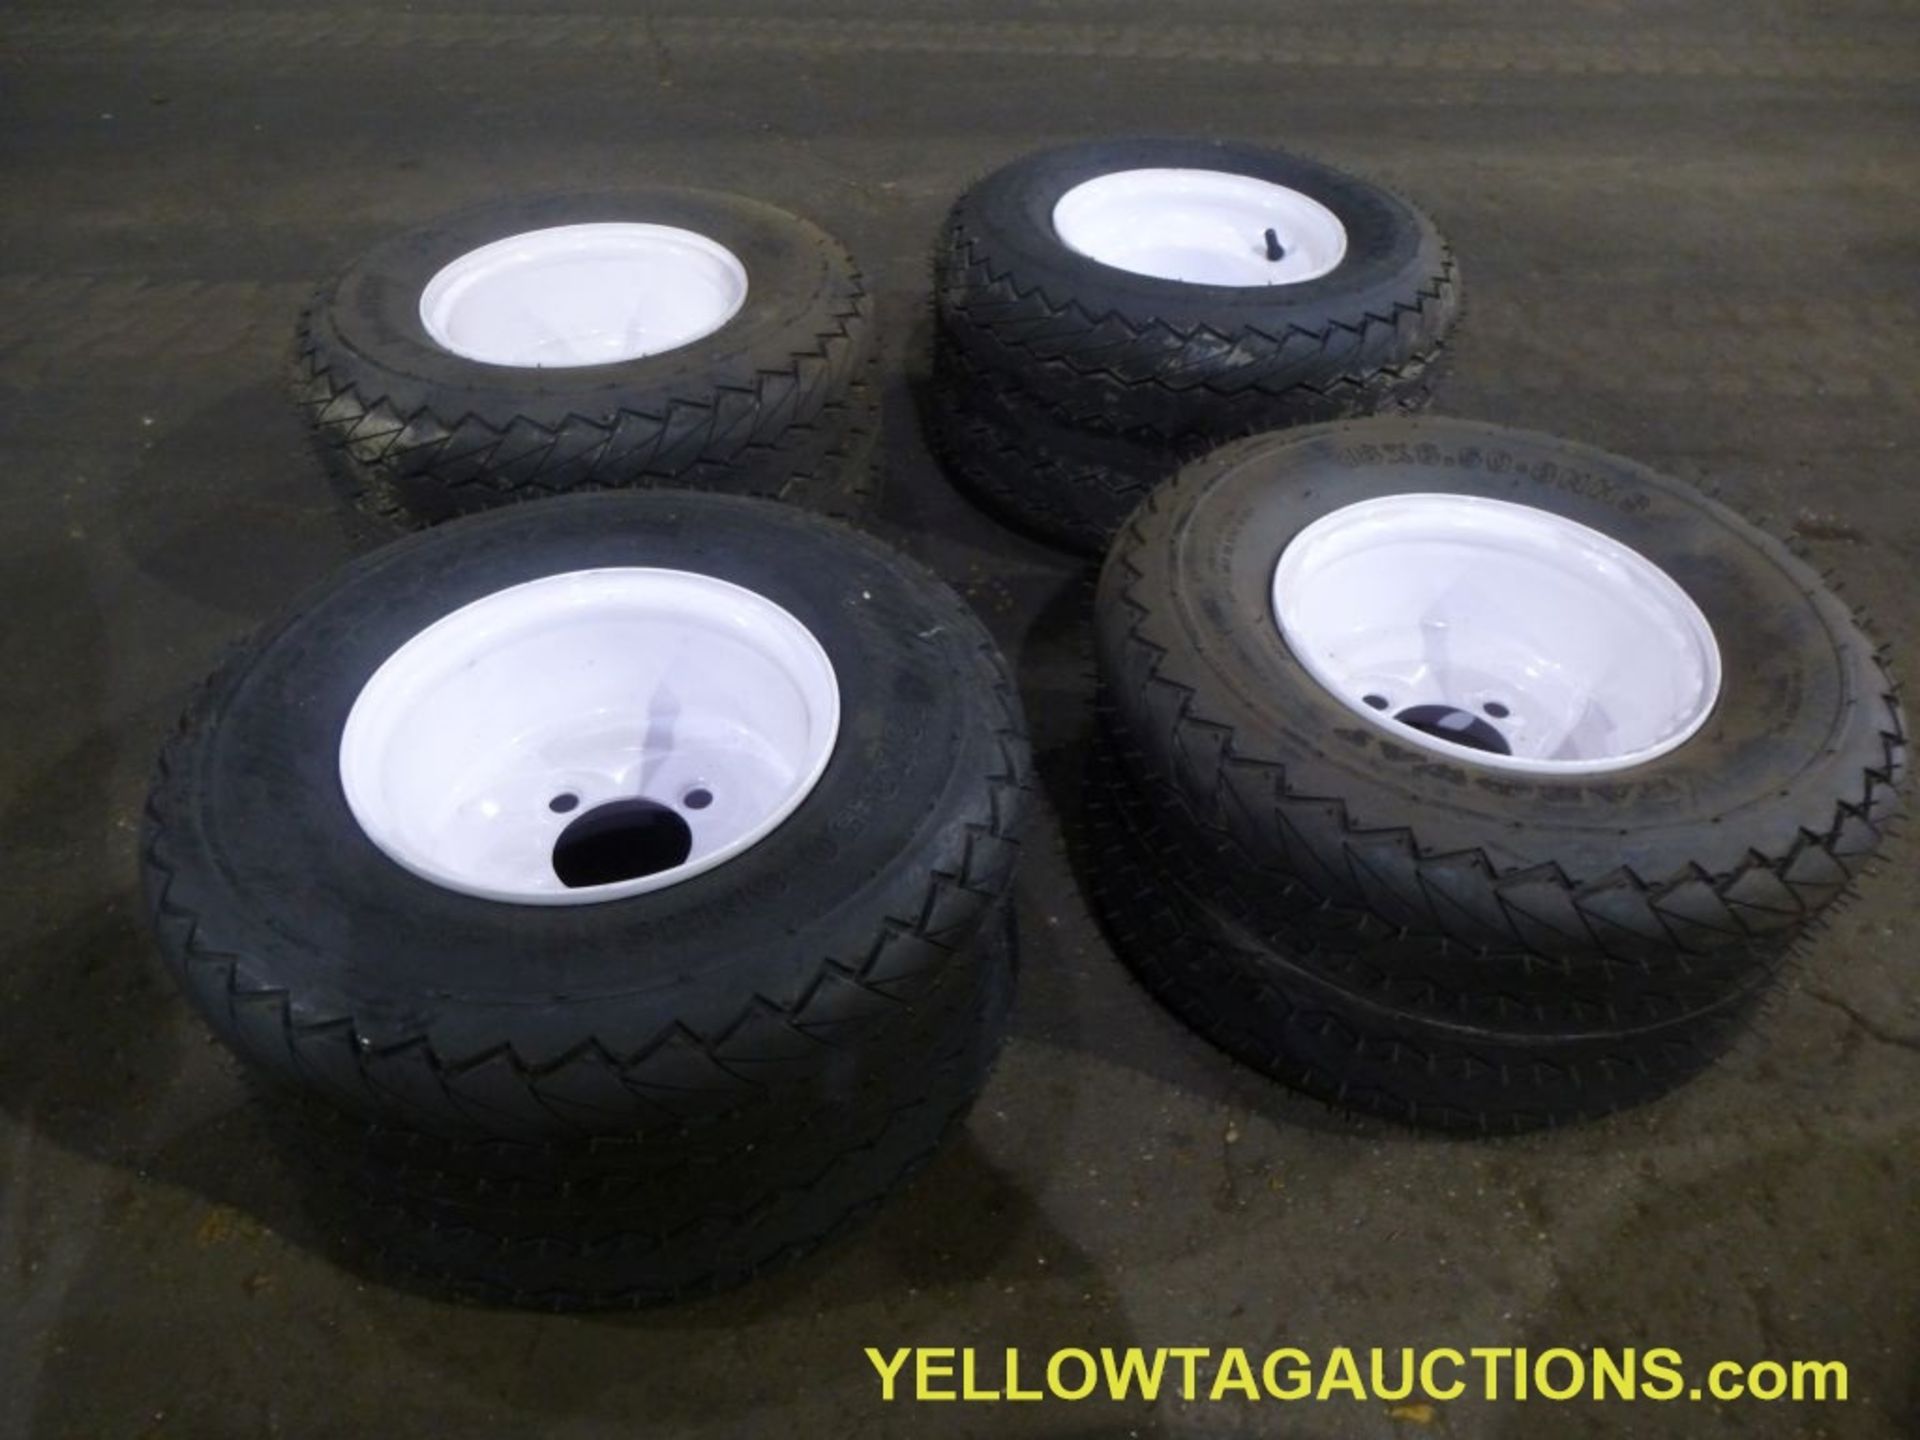 Lot of (12) FarWay 6-Ply Nylon Tires & Wheels|18 X 8.50 - 8NHS|Tag: 431 - Image 2 of 8